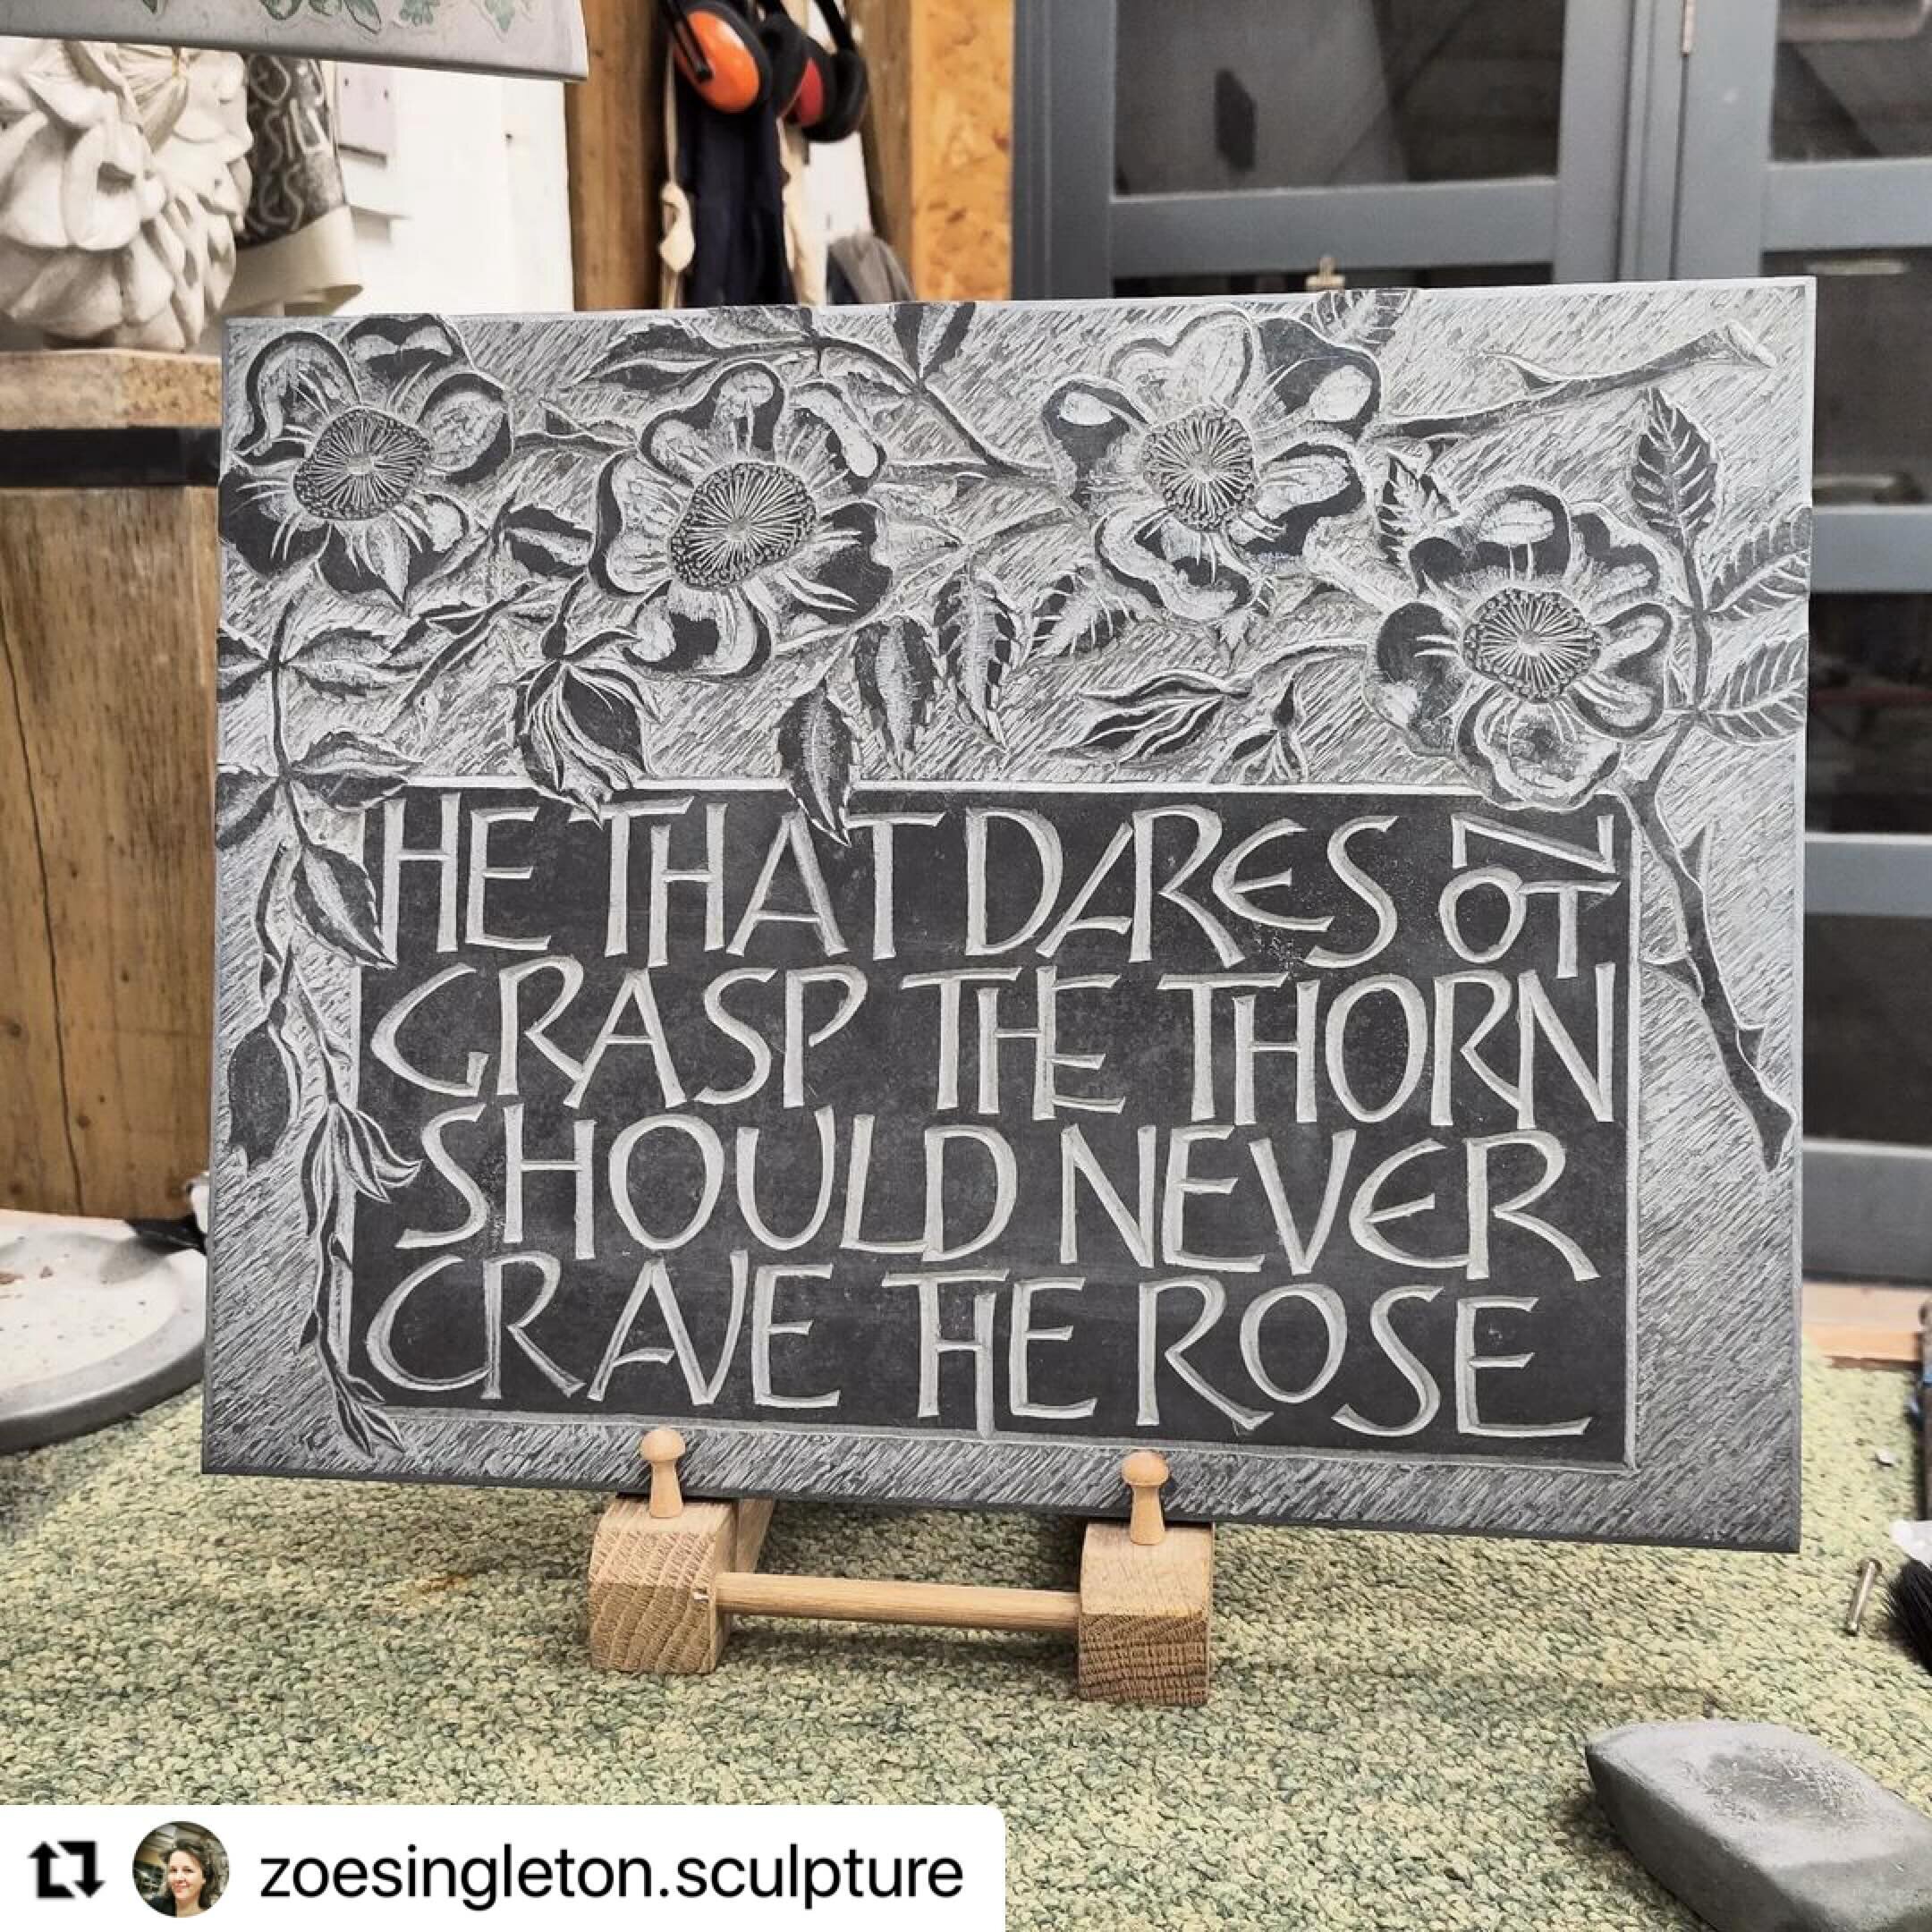 #Repost @zoesingleton.sculpture 
・・・
Lots of work still to do on those roses - Work in Progress. 

It&rsquo;s all the fiddly work now, refining and polishing, always takes as long as the carving. I love this Anne Bront&euml; quote, it&rsquo;s been on